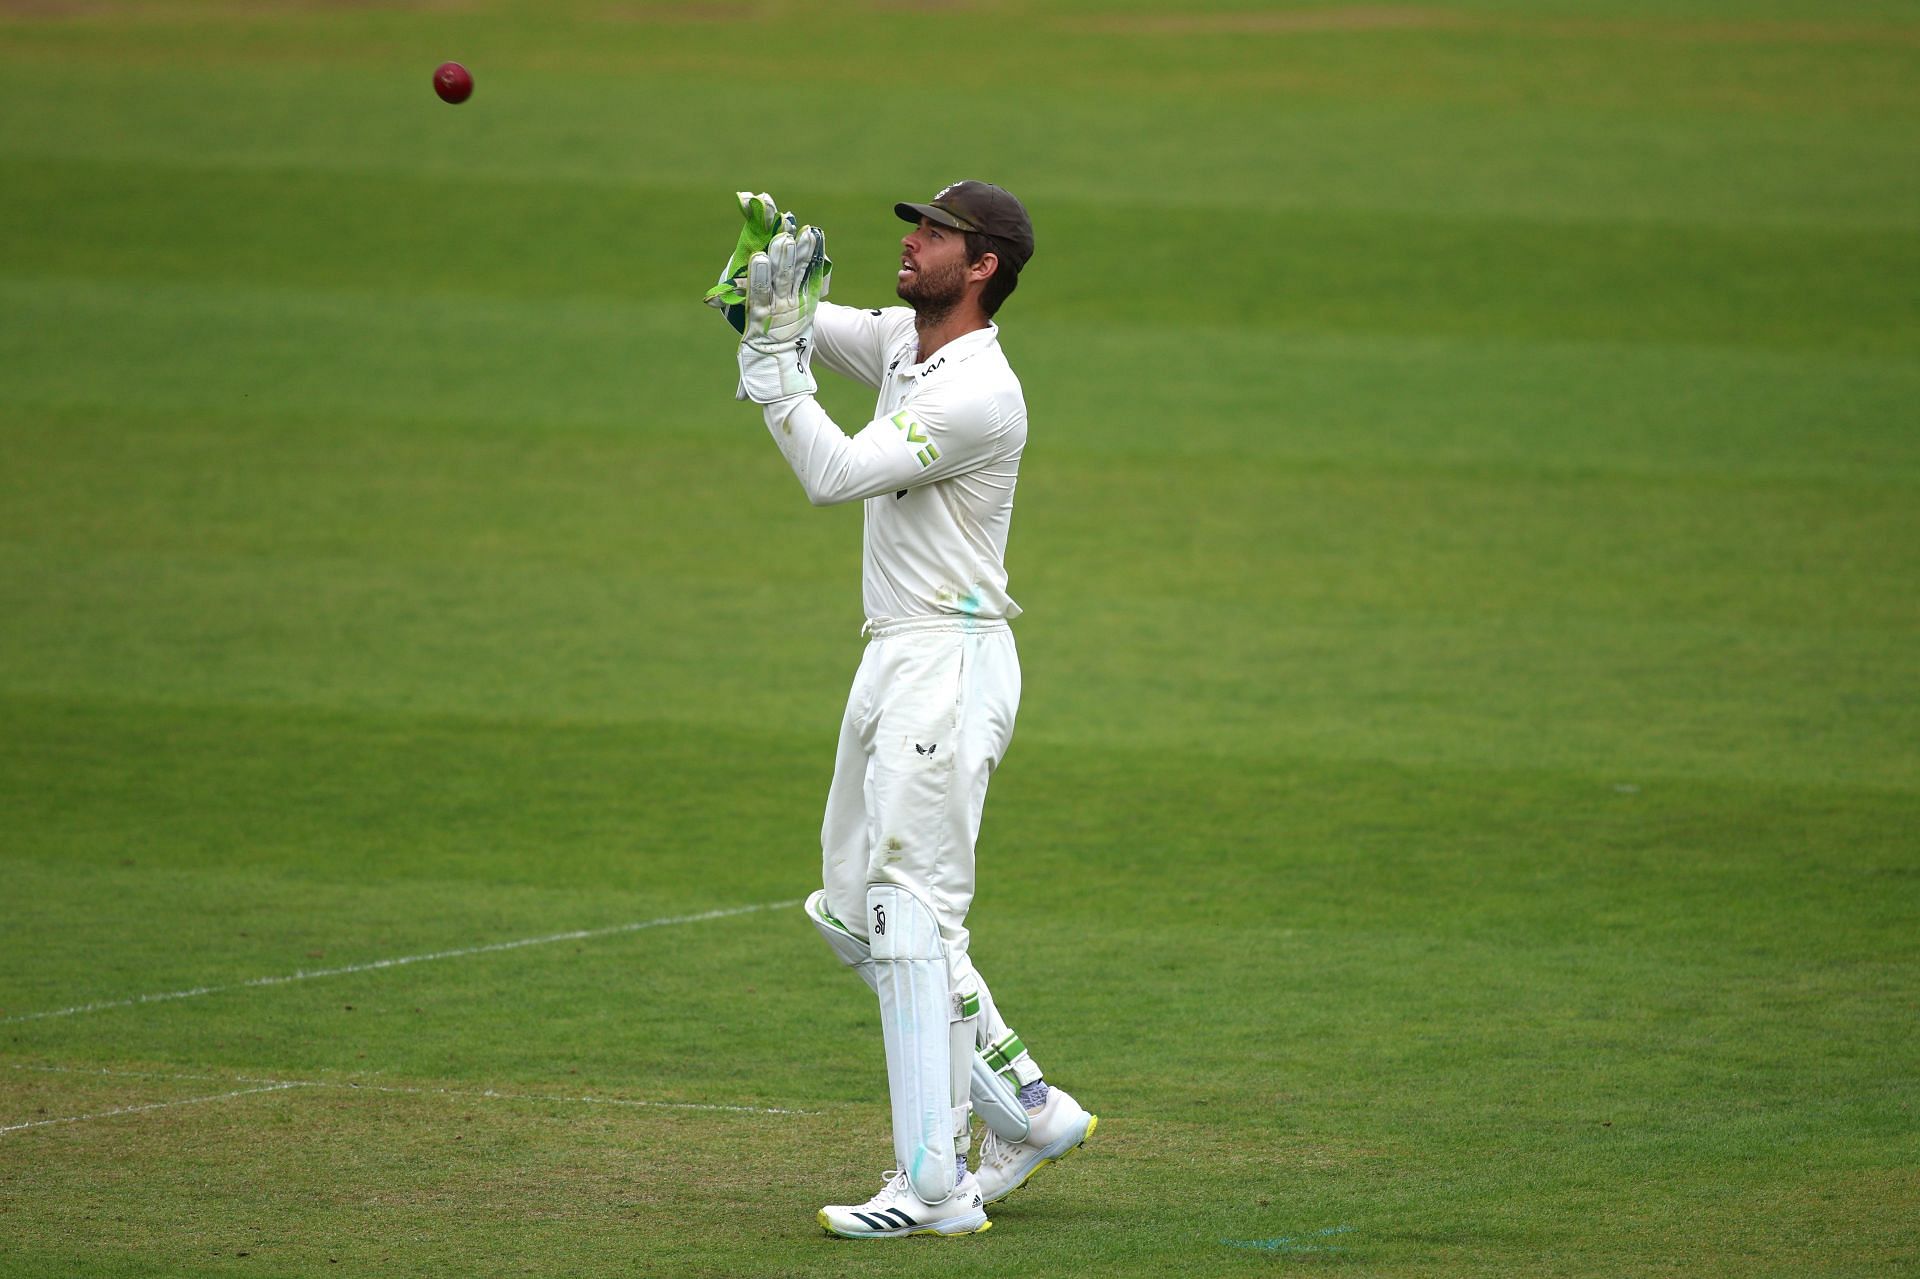 England should consider drafting Ben Foakes into the 11 for the Manchester Test